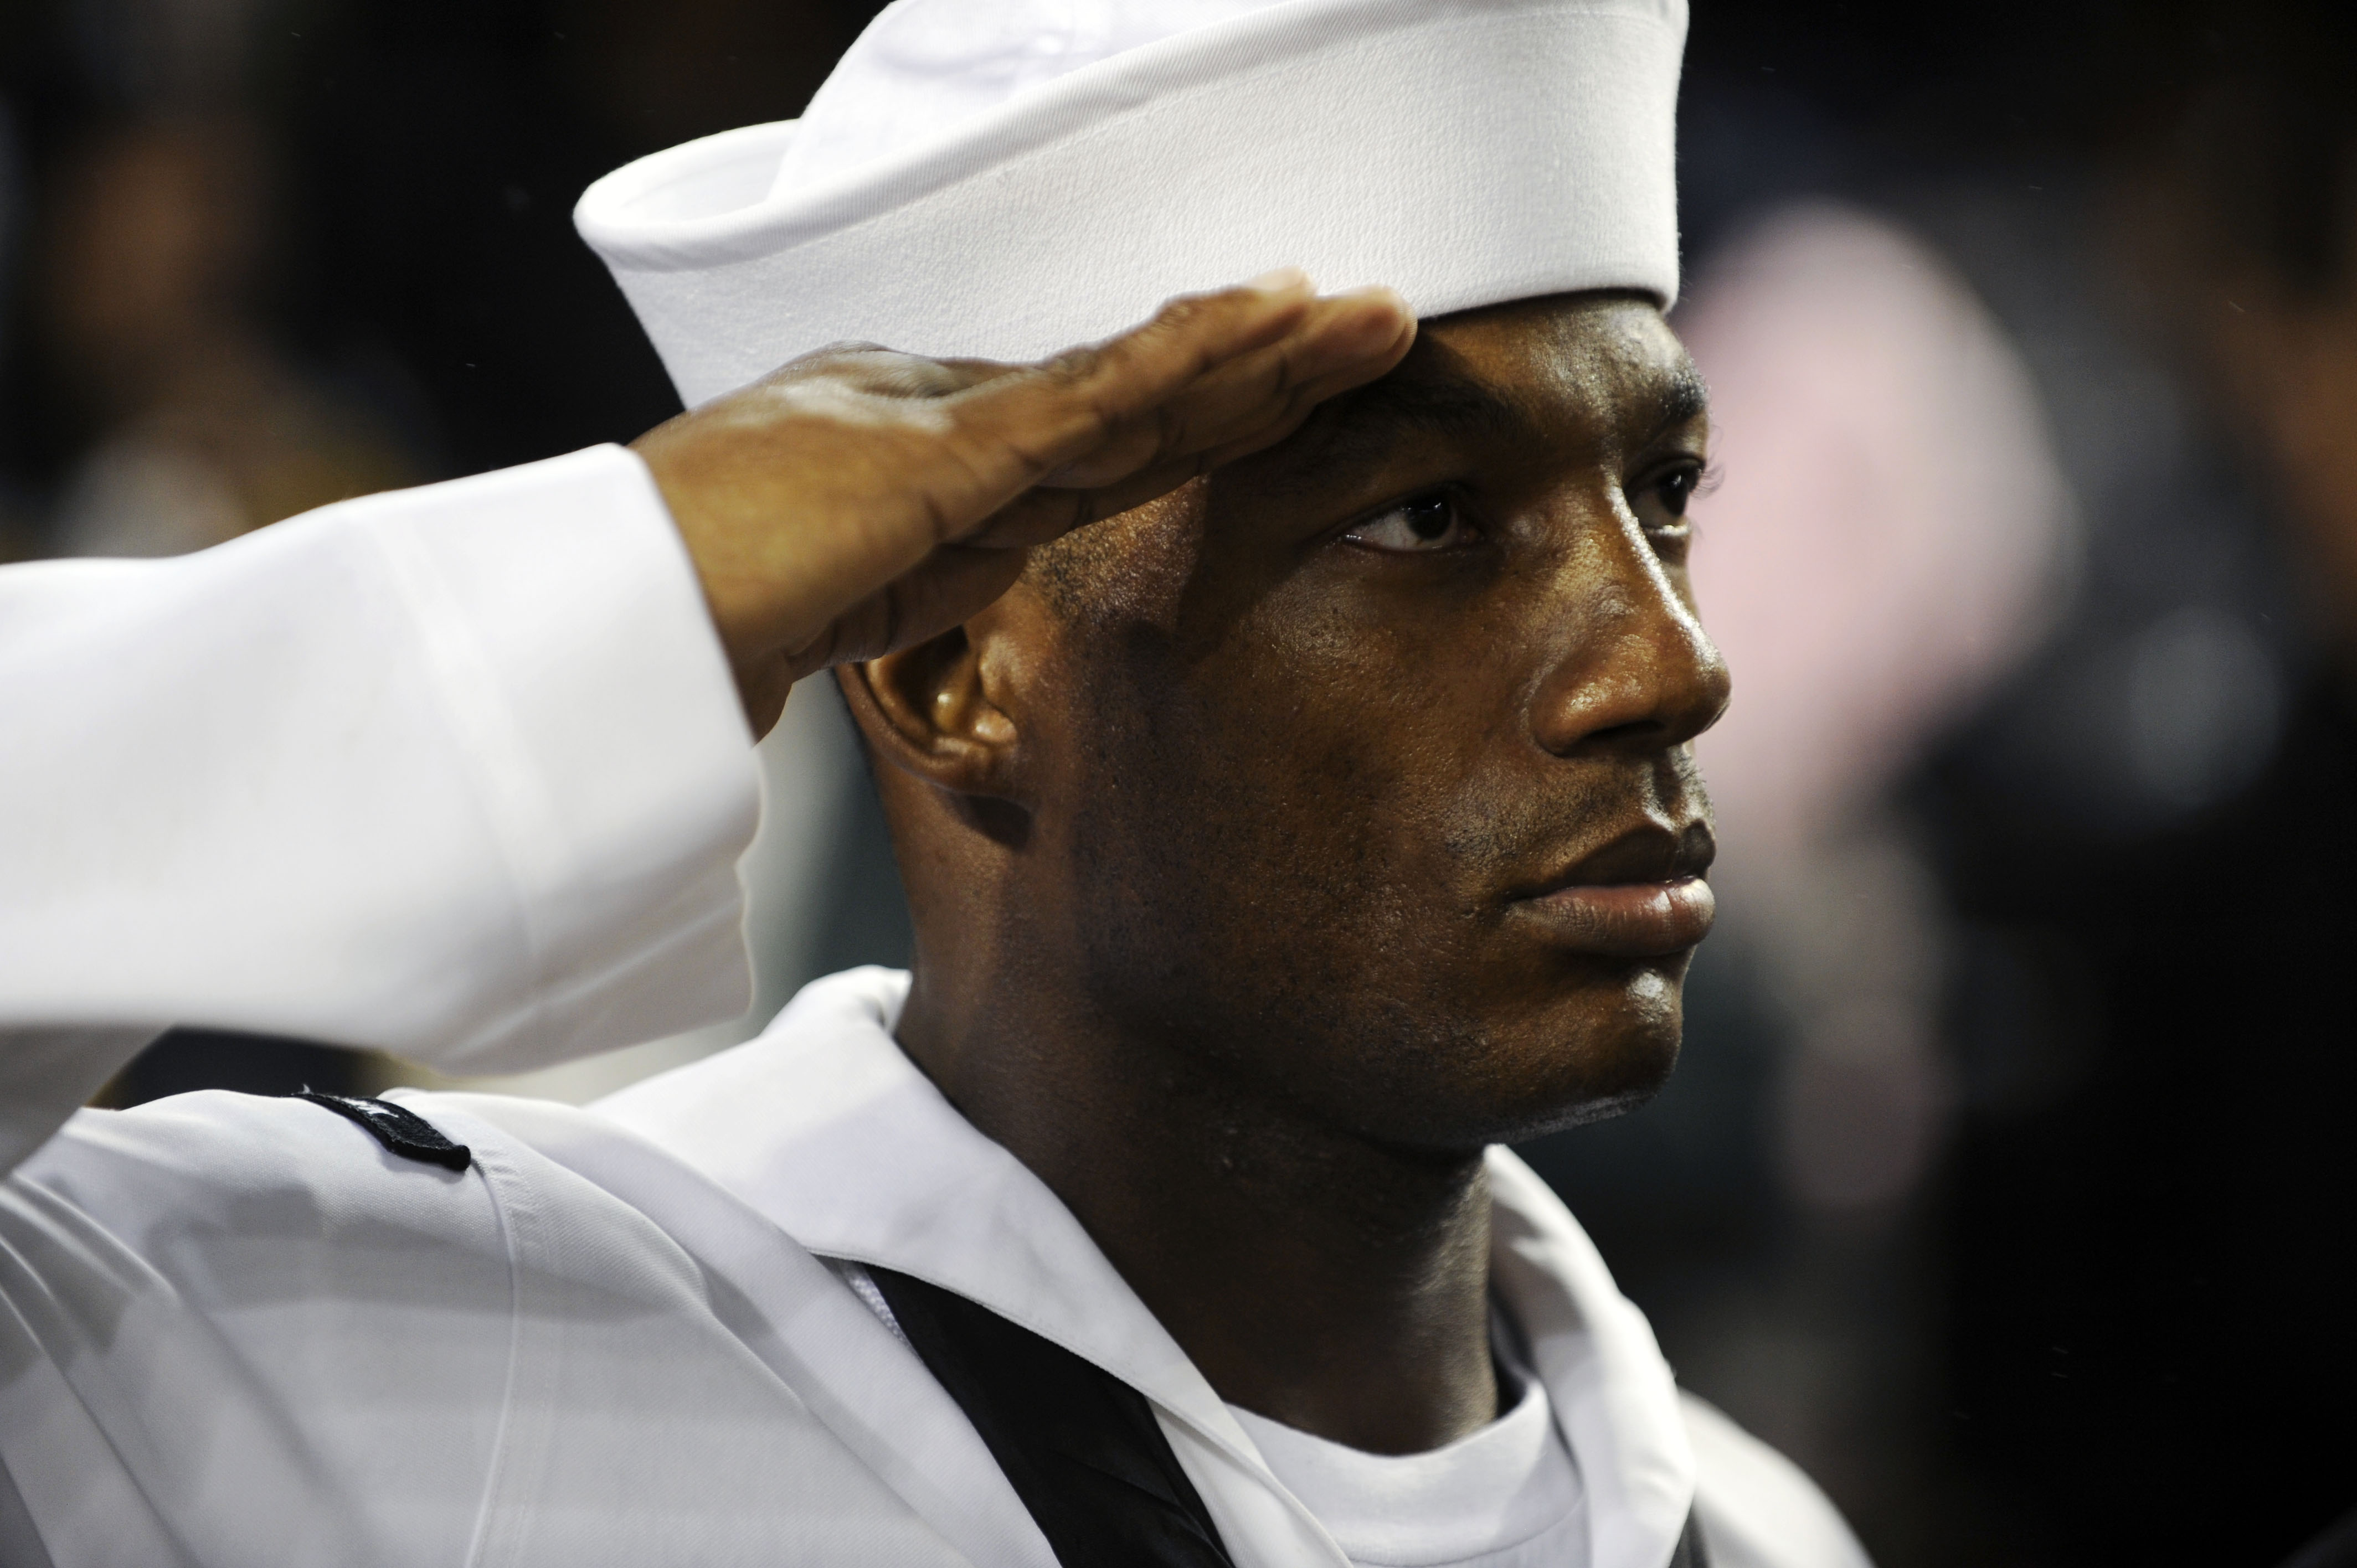 US Navy 090911-N-0413R-227 Chief Information Systems Technician Hakim Bristow salutes during the national anthem during a pre-game ceremony at Yankee Stadium